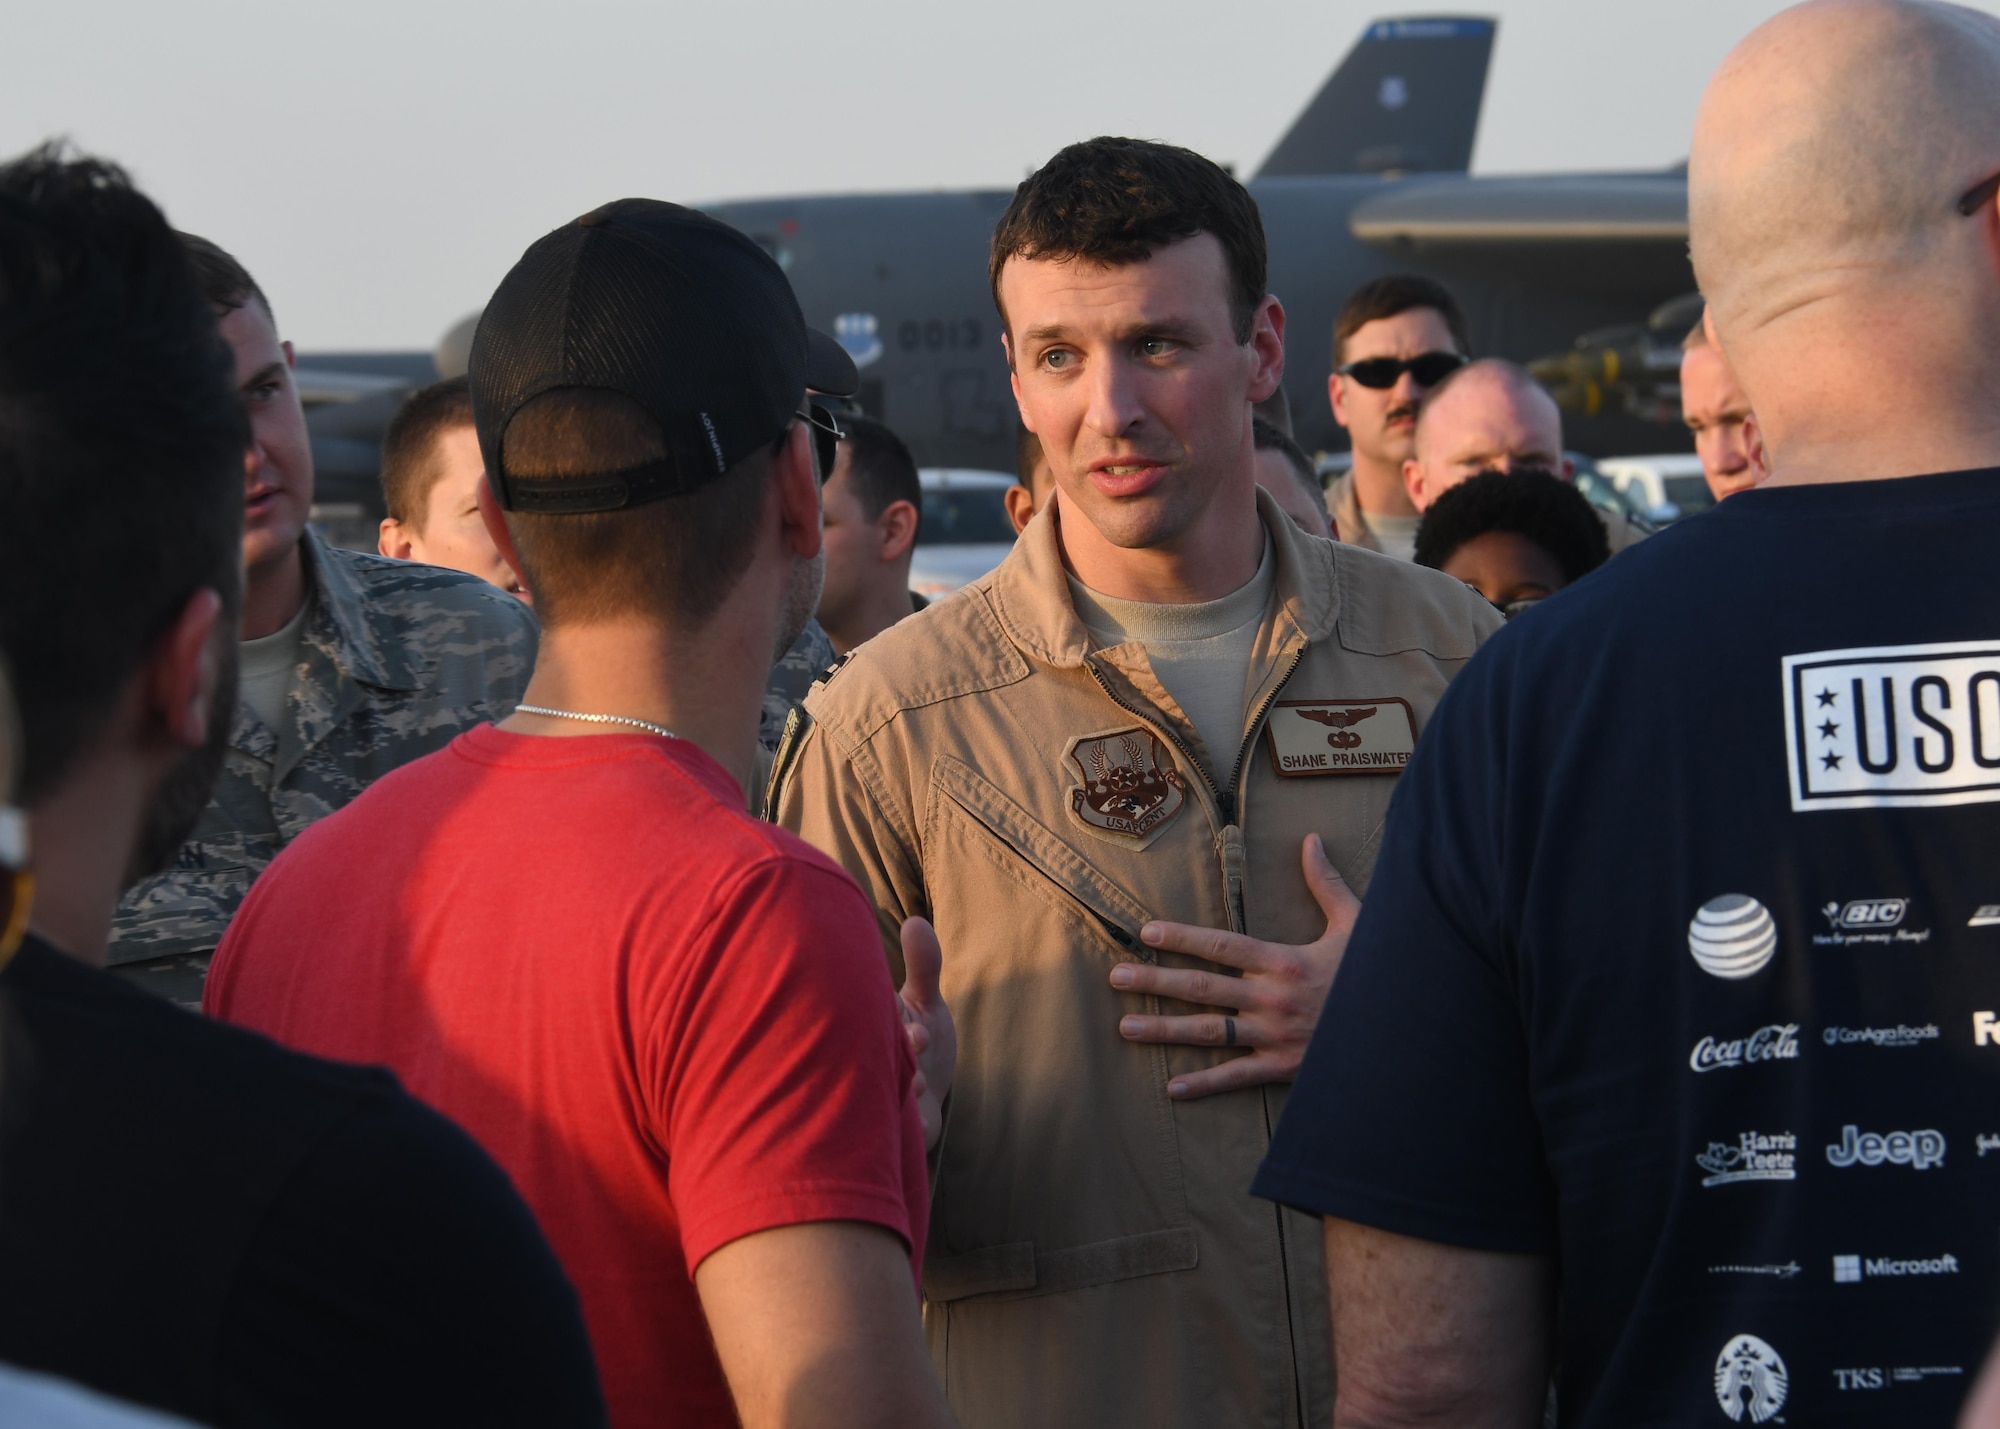 U.S Air Force Captain Shane Praiswater, 96th Expeditionary Bomber Squadron assistant director of operations, gives a briefing to celebrities, support personnel and USO Staff members at Al Udeid Air Base, Qatar, Dec. 6, 2016. Praiswater described the mission and capabilities at Al Udeid to the group, who were going on their way around the base during a holiday USO tour. (U.S. Air Force photo by Senior Airman Miles Wilson)